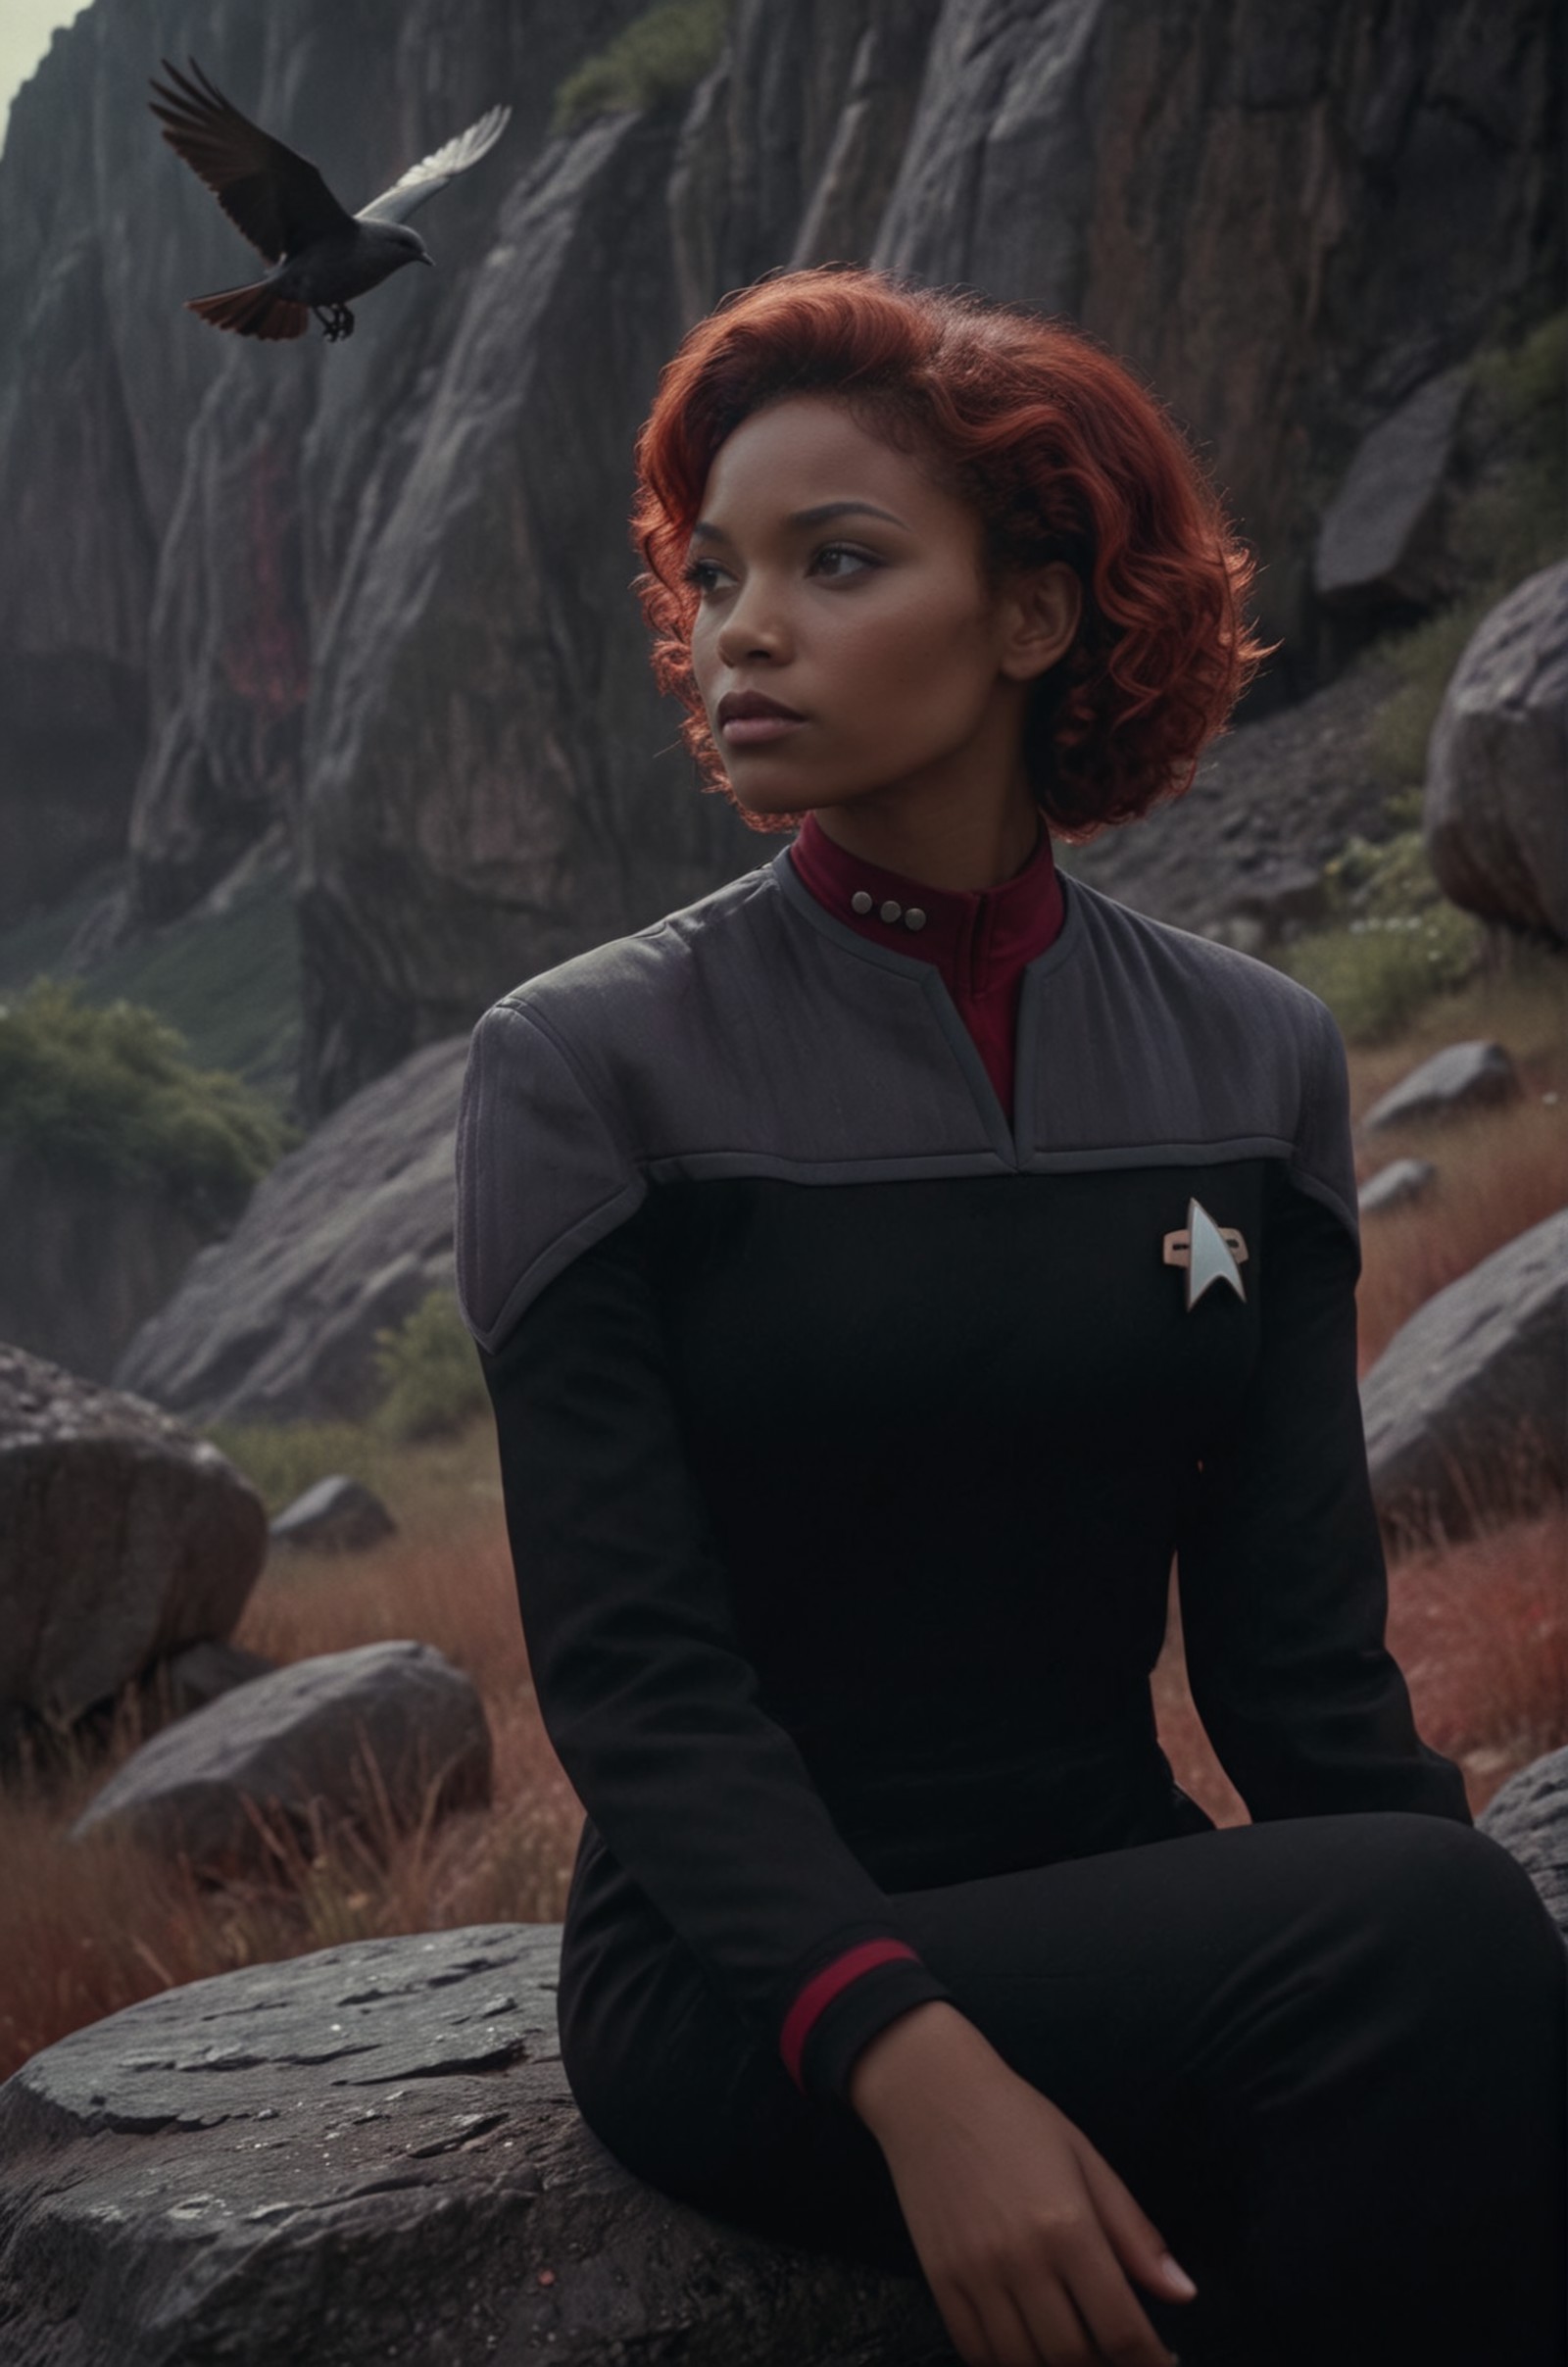 woman sitting at a rock in the mountains, gazing at bird in the air,woman  in black and grey ds9st uniform,red collar,intr...